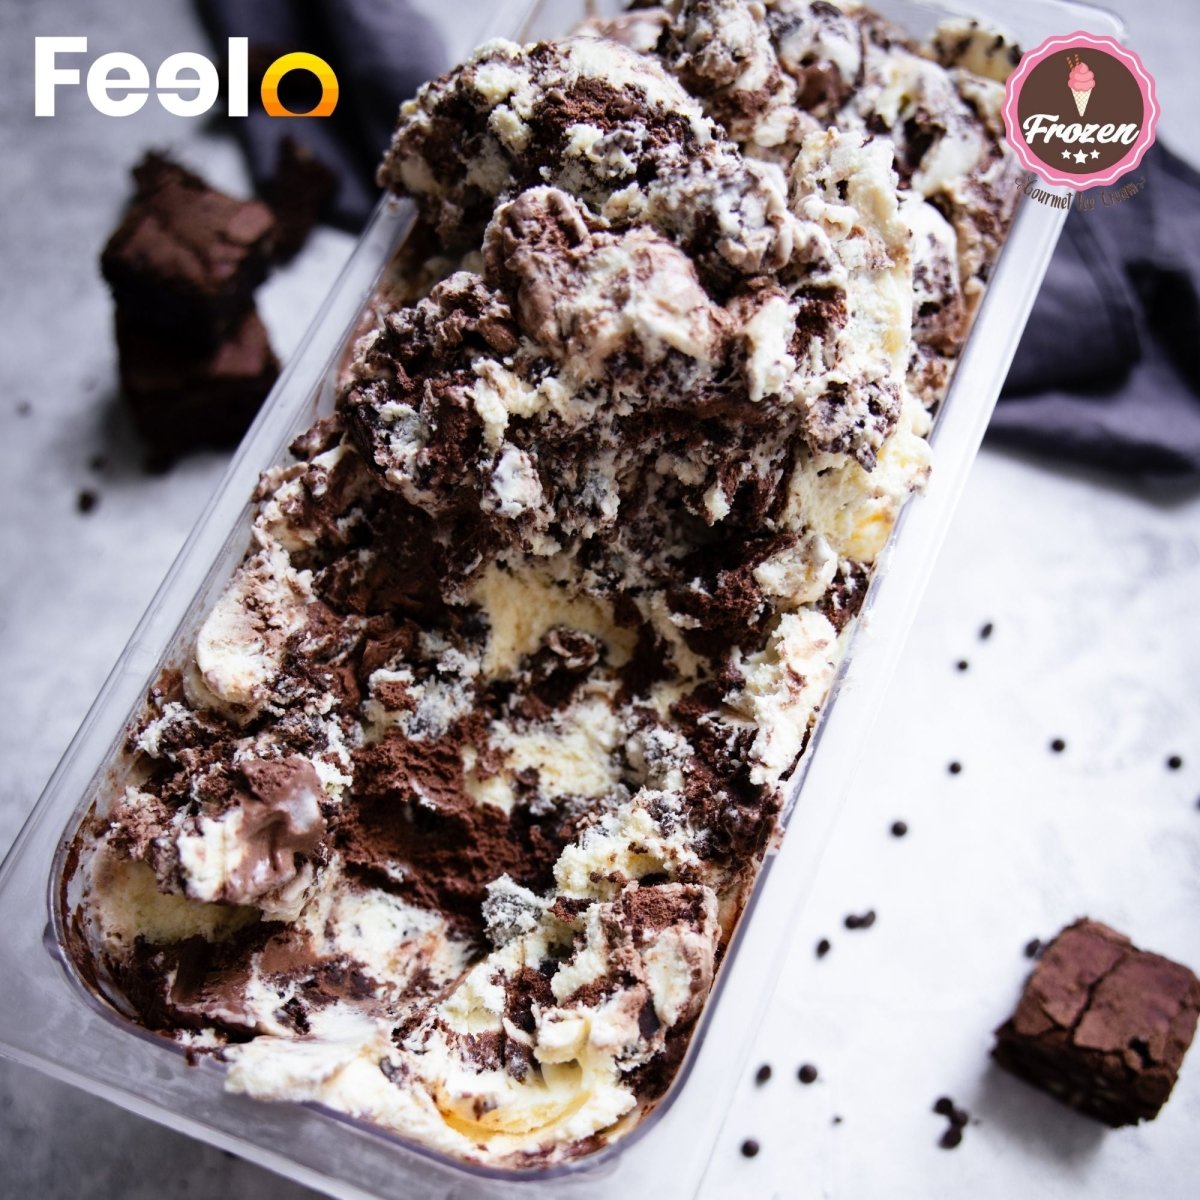 2x regular cup of 2x scoops of Premium, homemade, and old-fashioned ice cream (100g) of your choice - Frozen Ice Cream, Majestic City, Bambalapitiya | Feelo